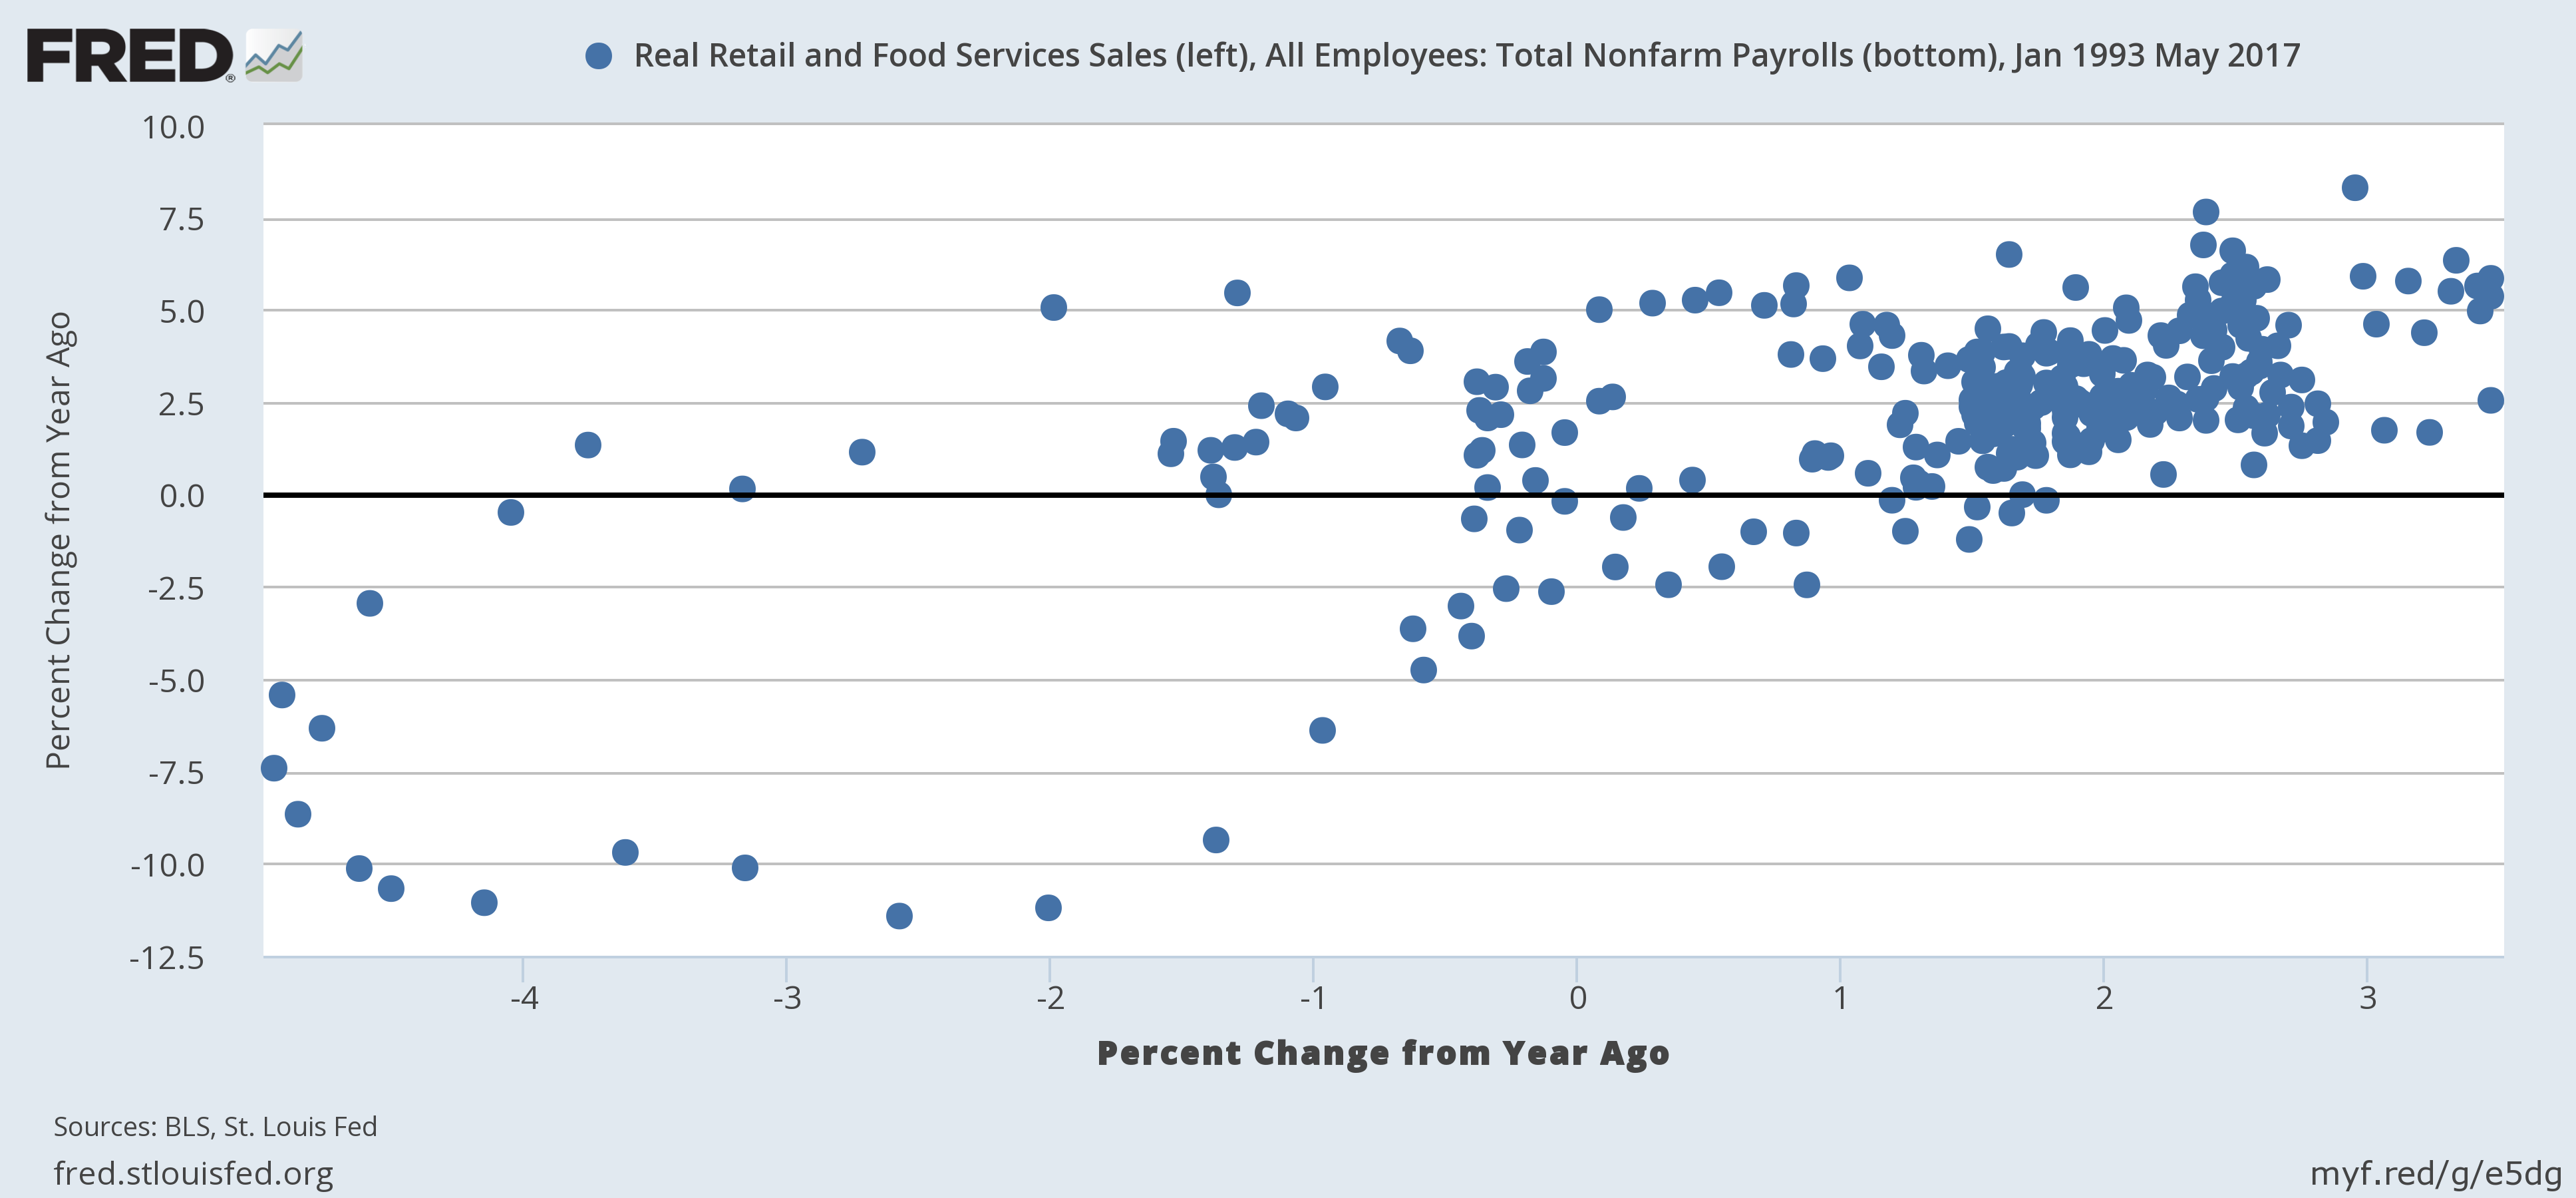 Relationship between the Y/Y % change in real retail sales 